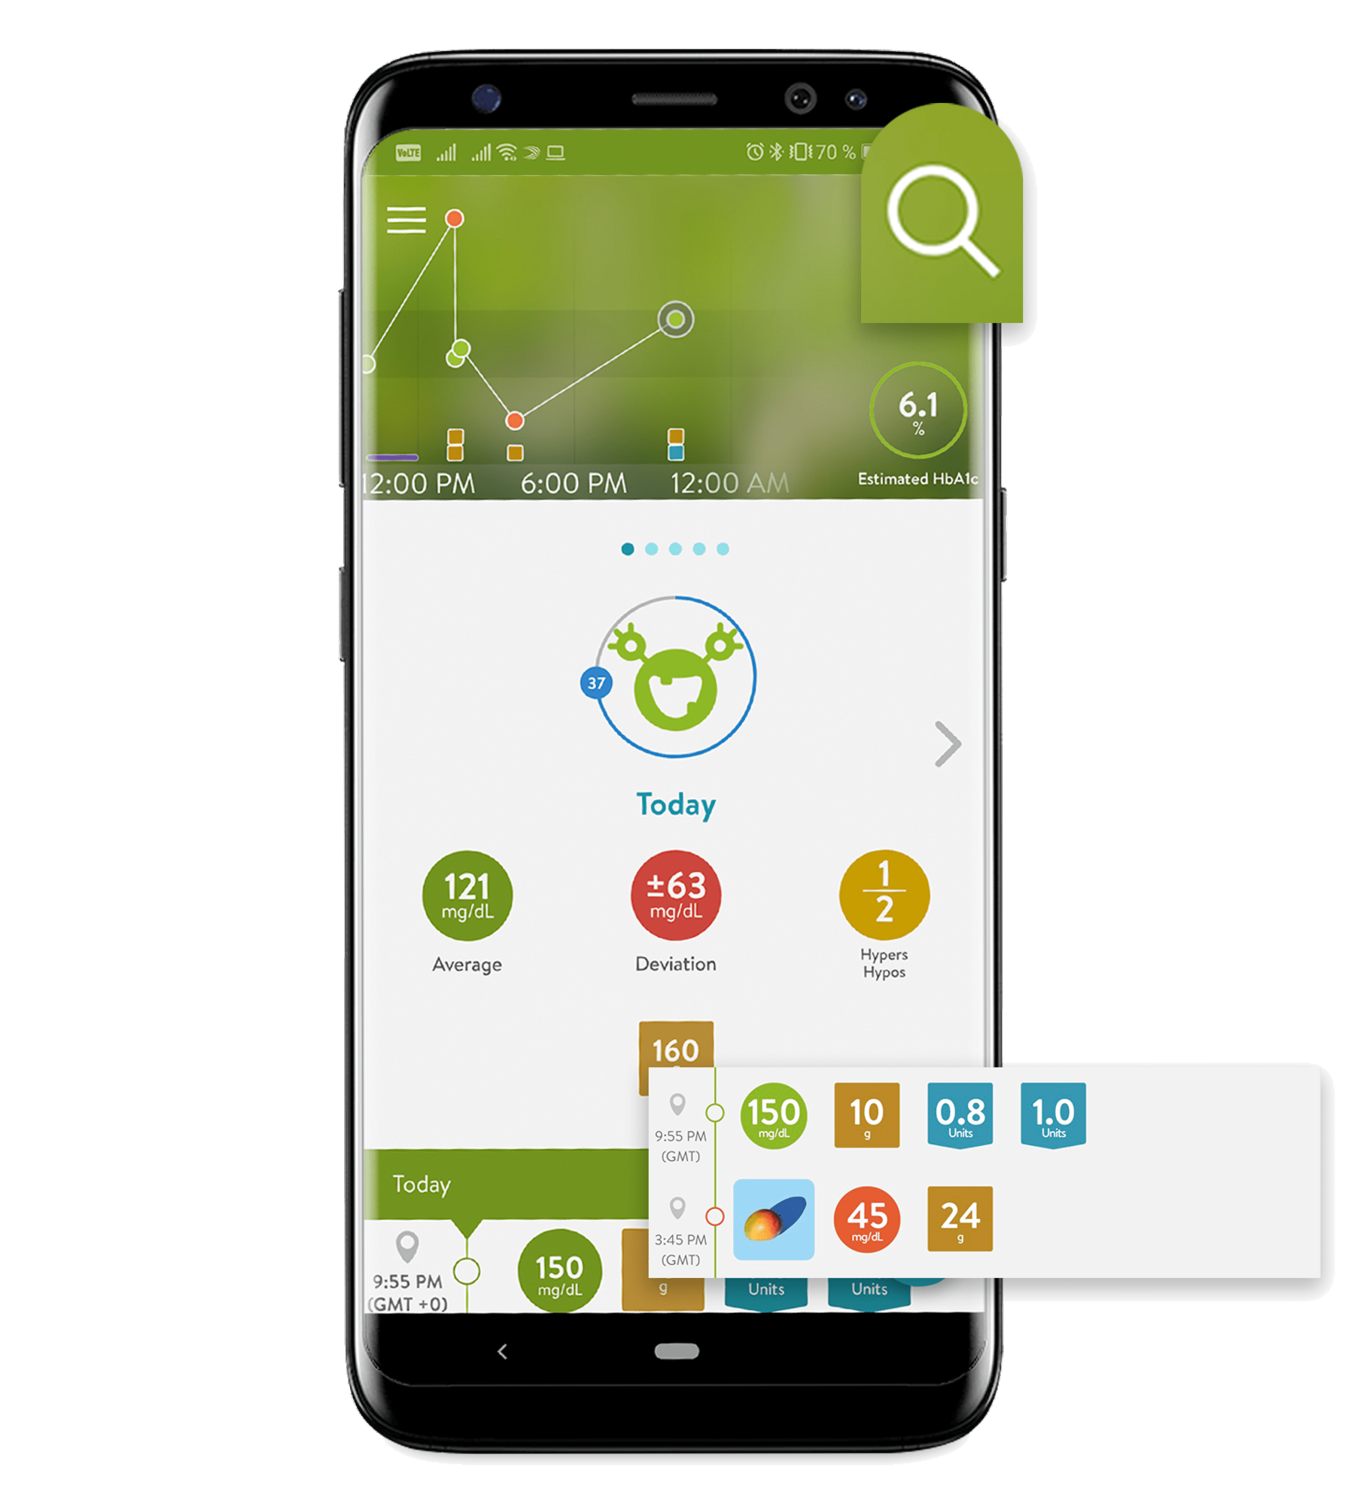 Android phone with mySugr mobile application Smart Search feature displayed